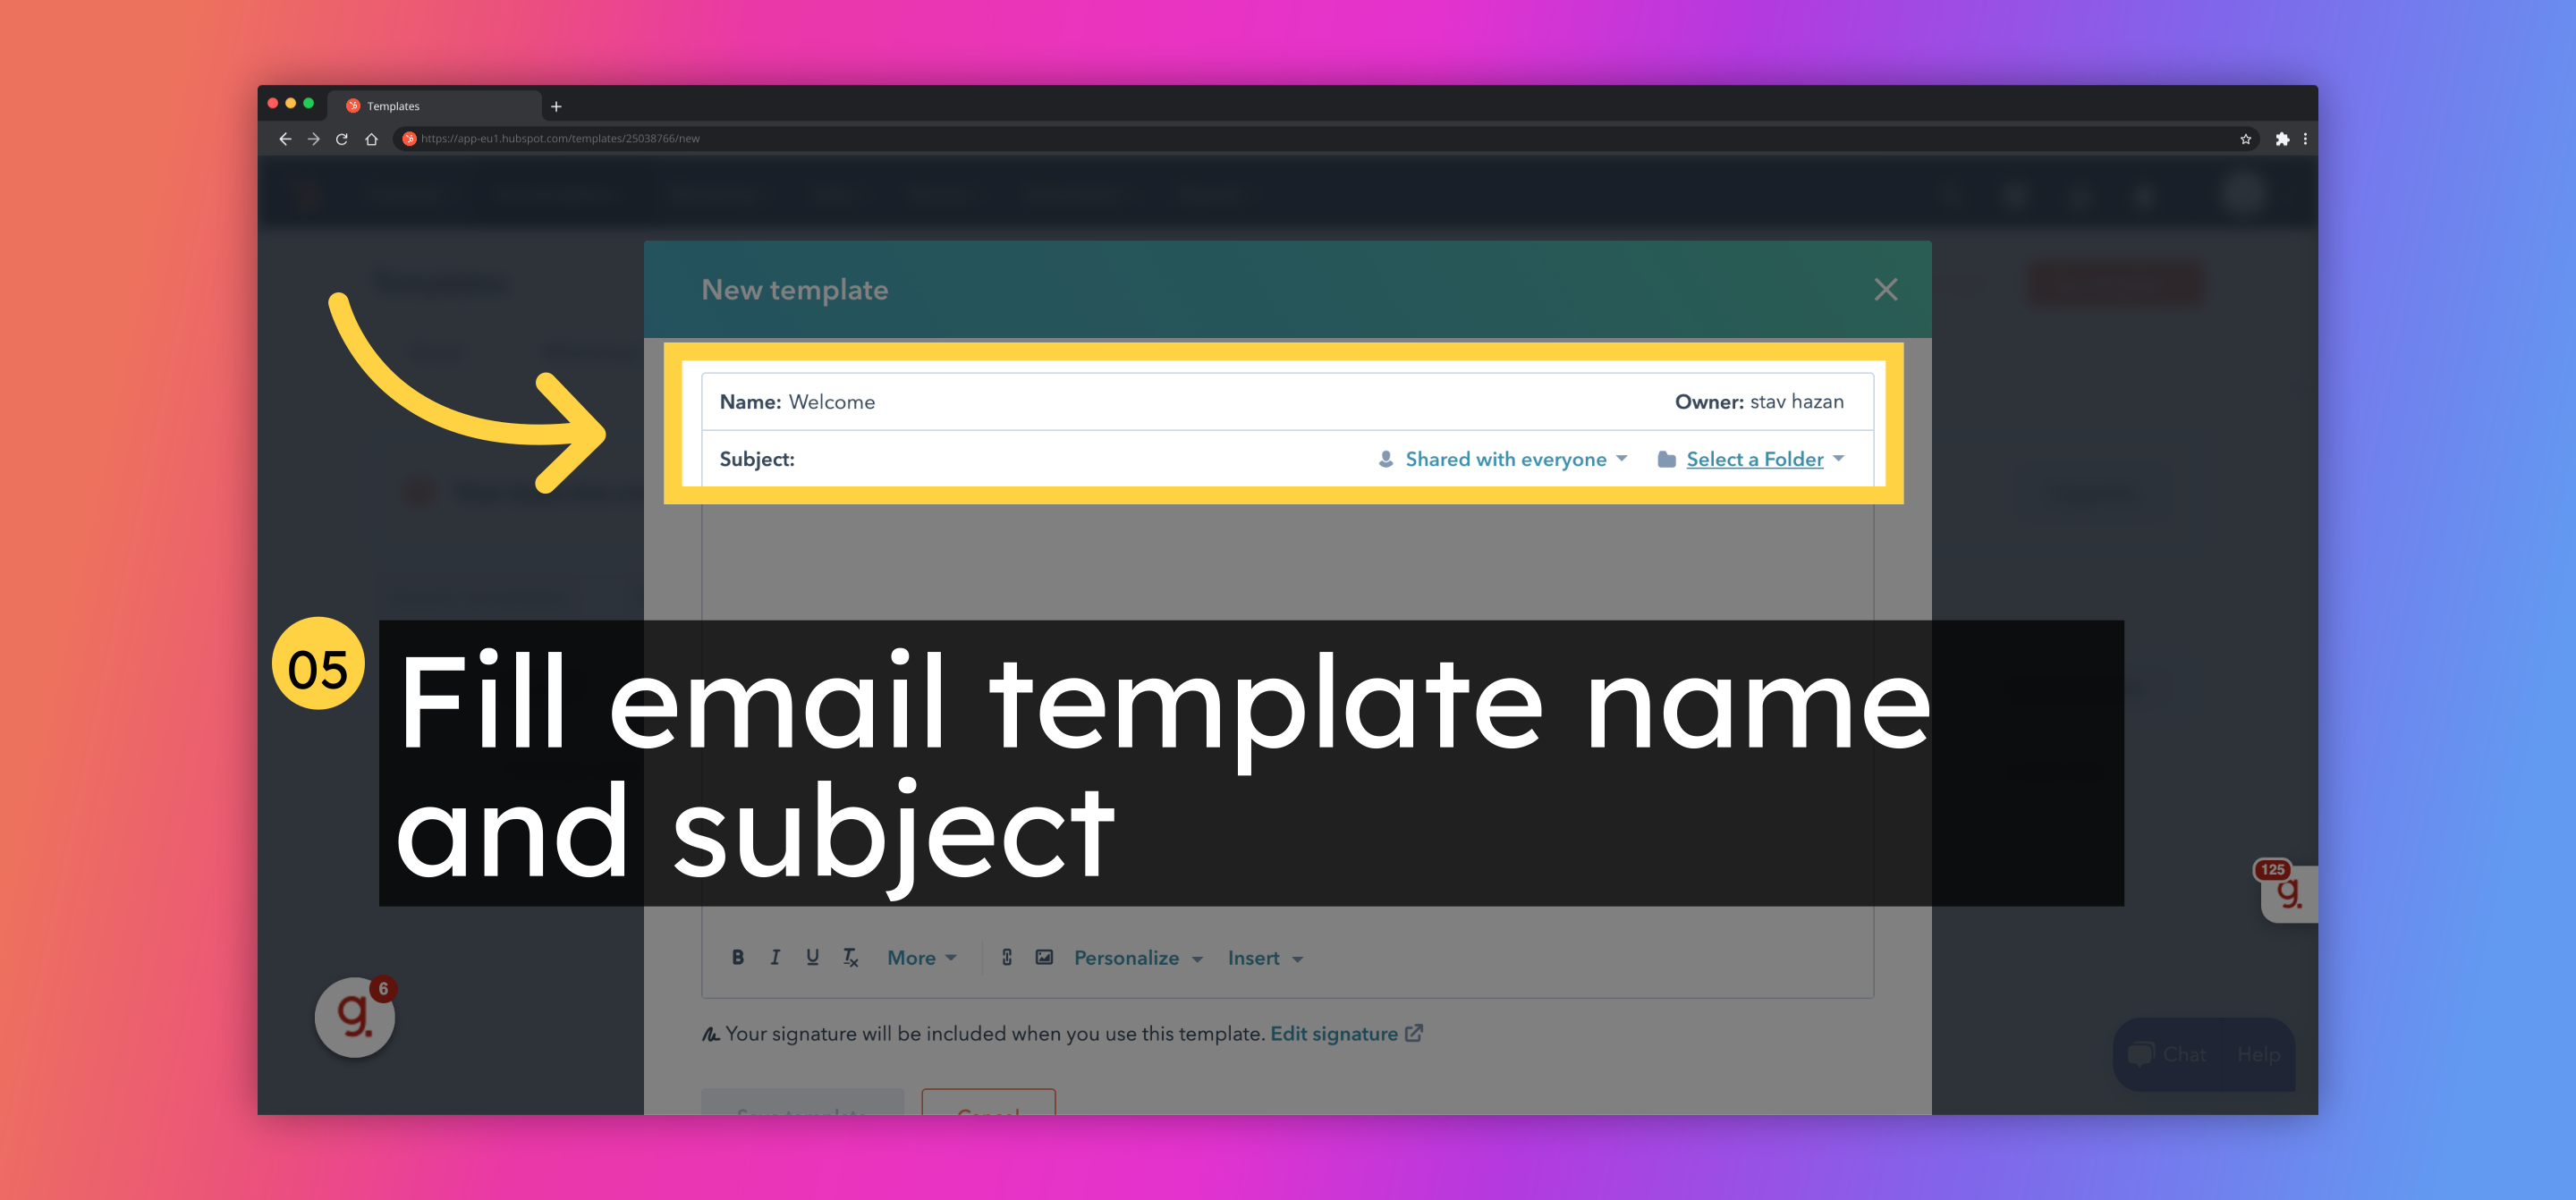 Fill email template name and subject